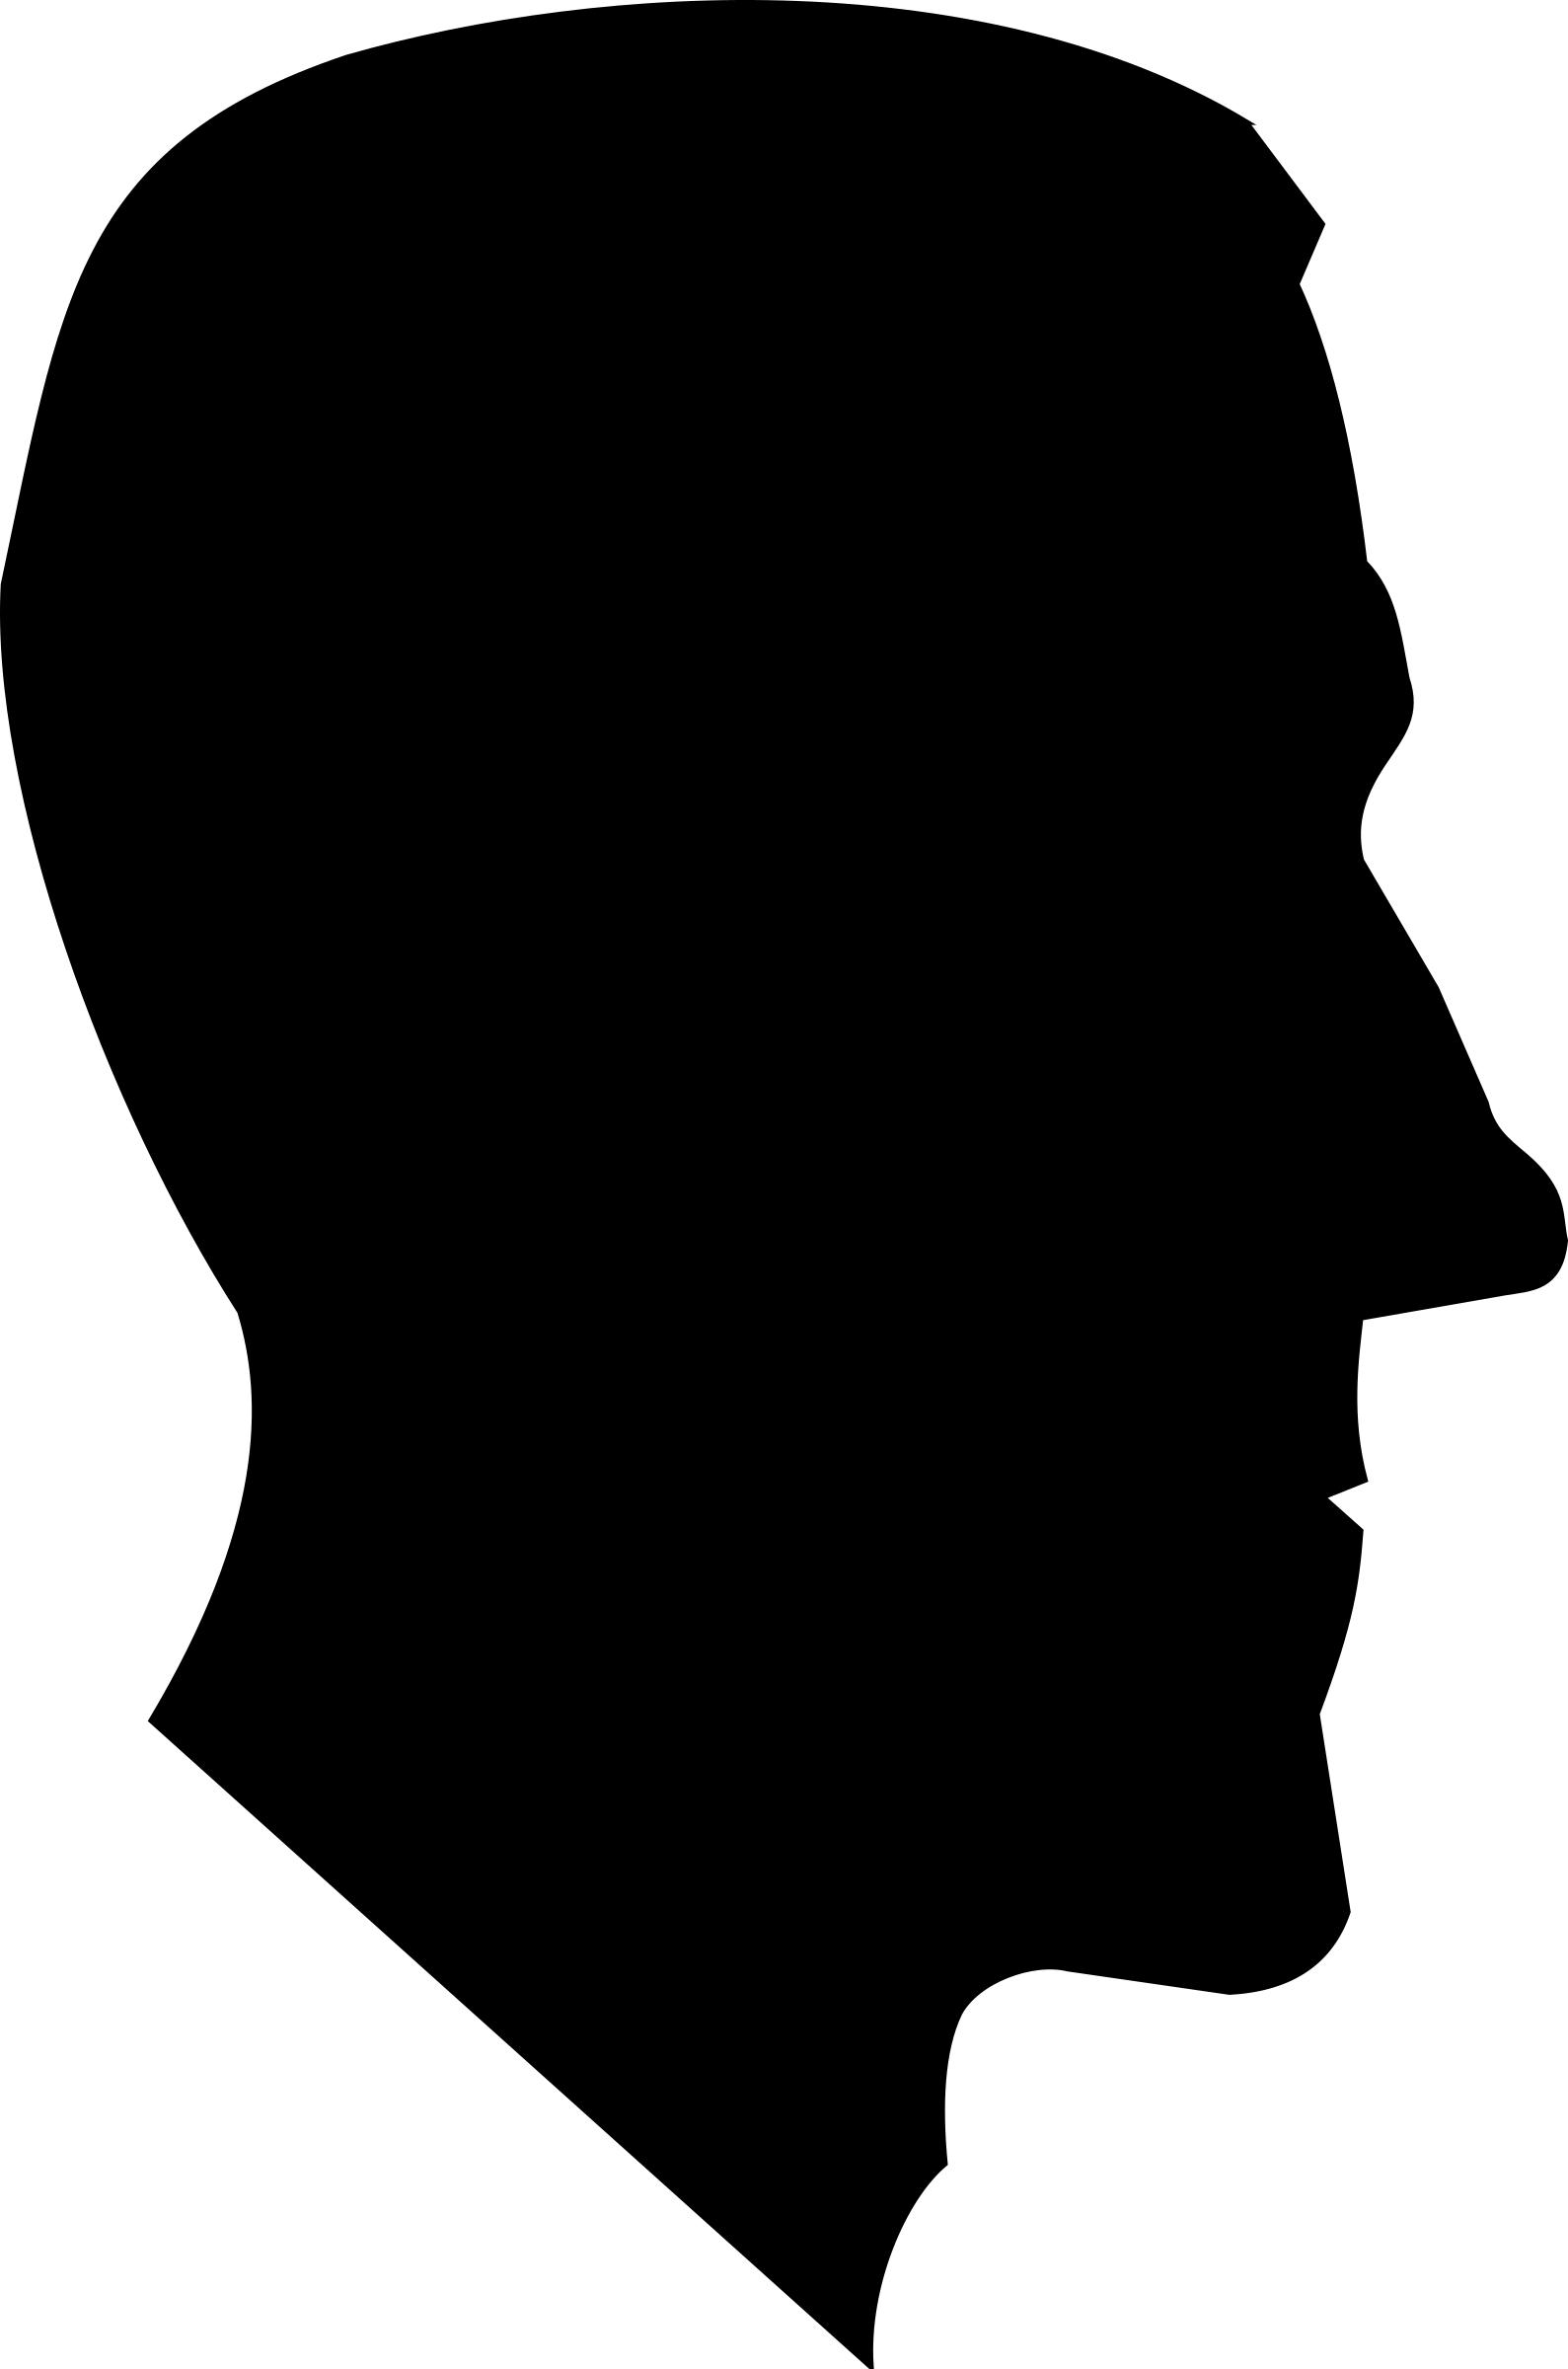 H. P. Lovecraft Profile Silhouette png